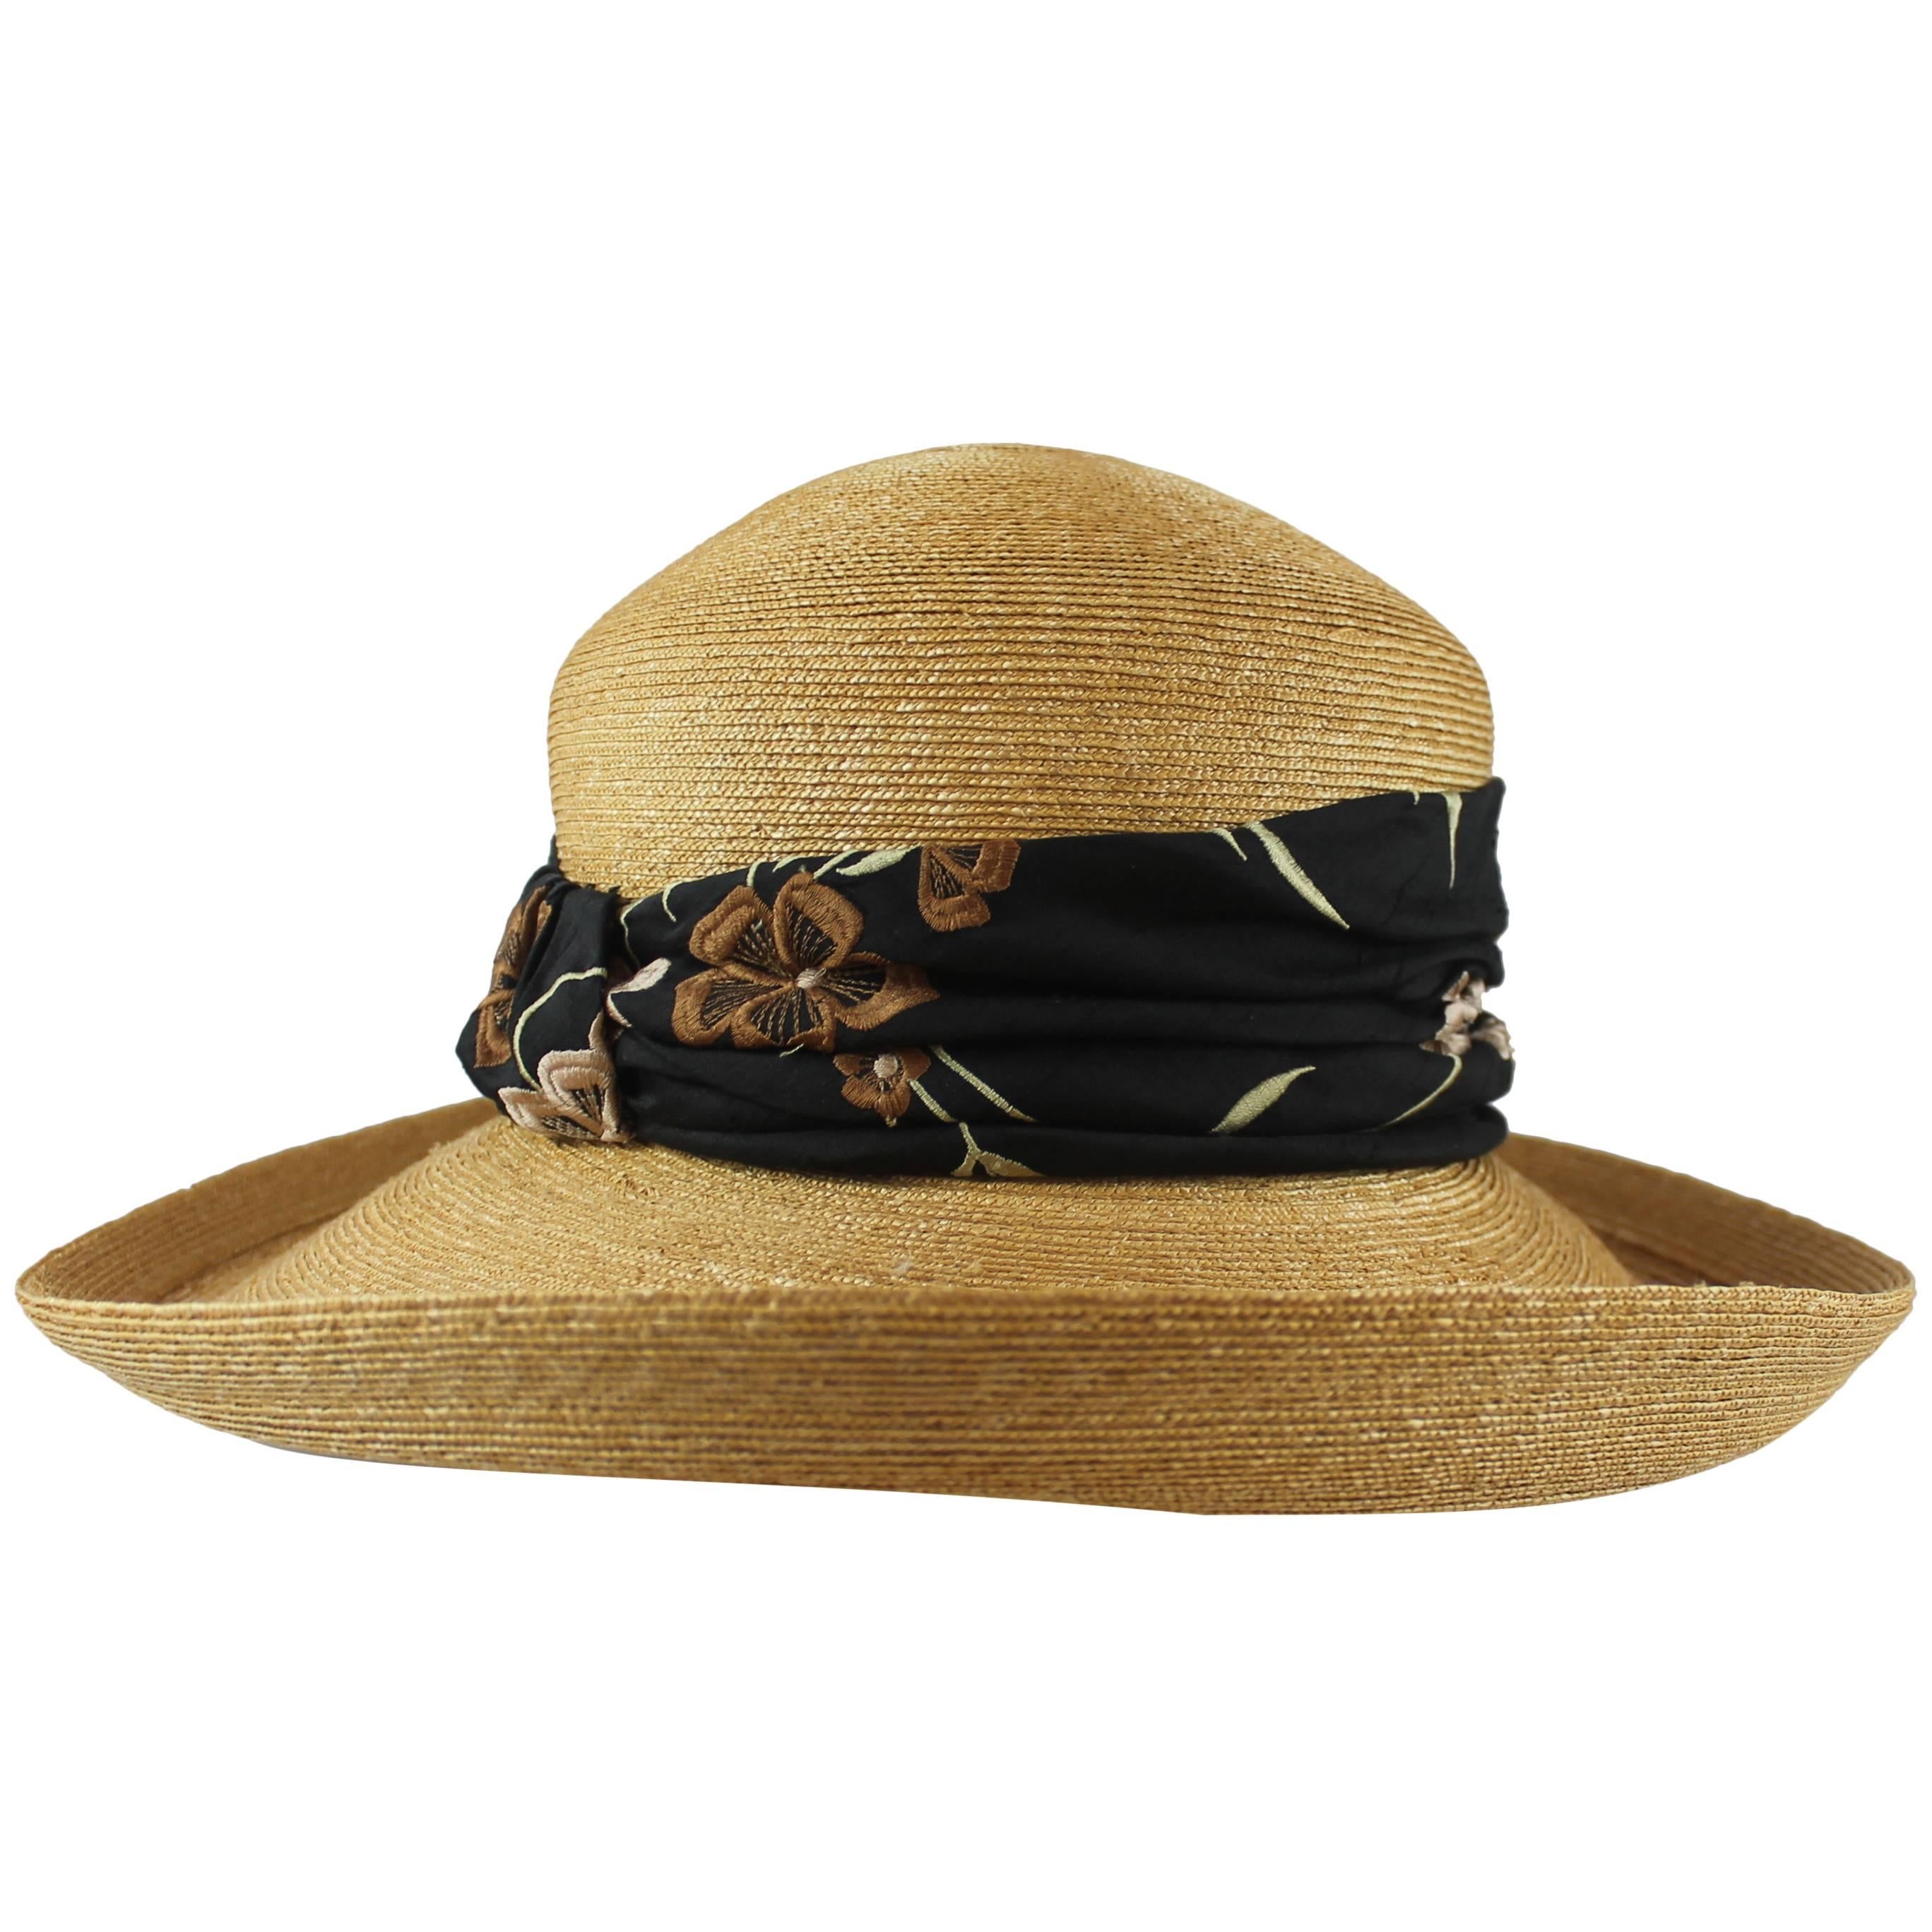 Suzanne Couture Millinery Tan Straw Hat with Black Floral Ribbon 